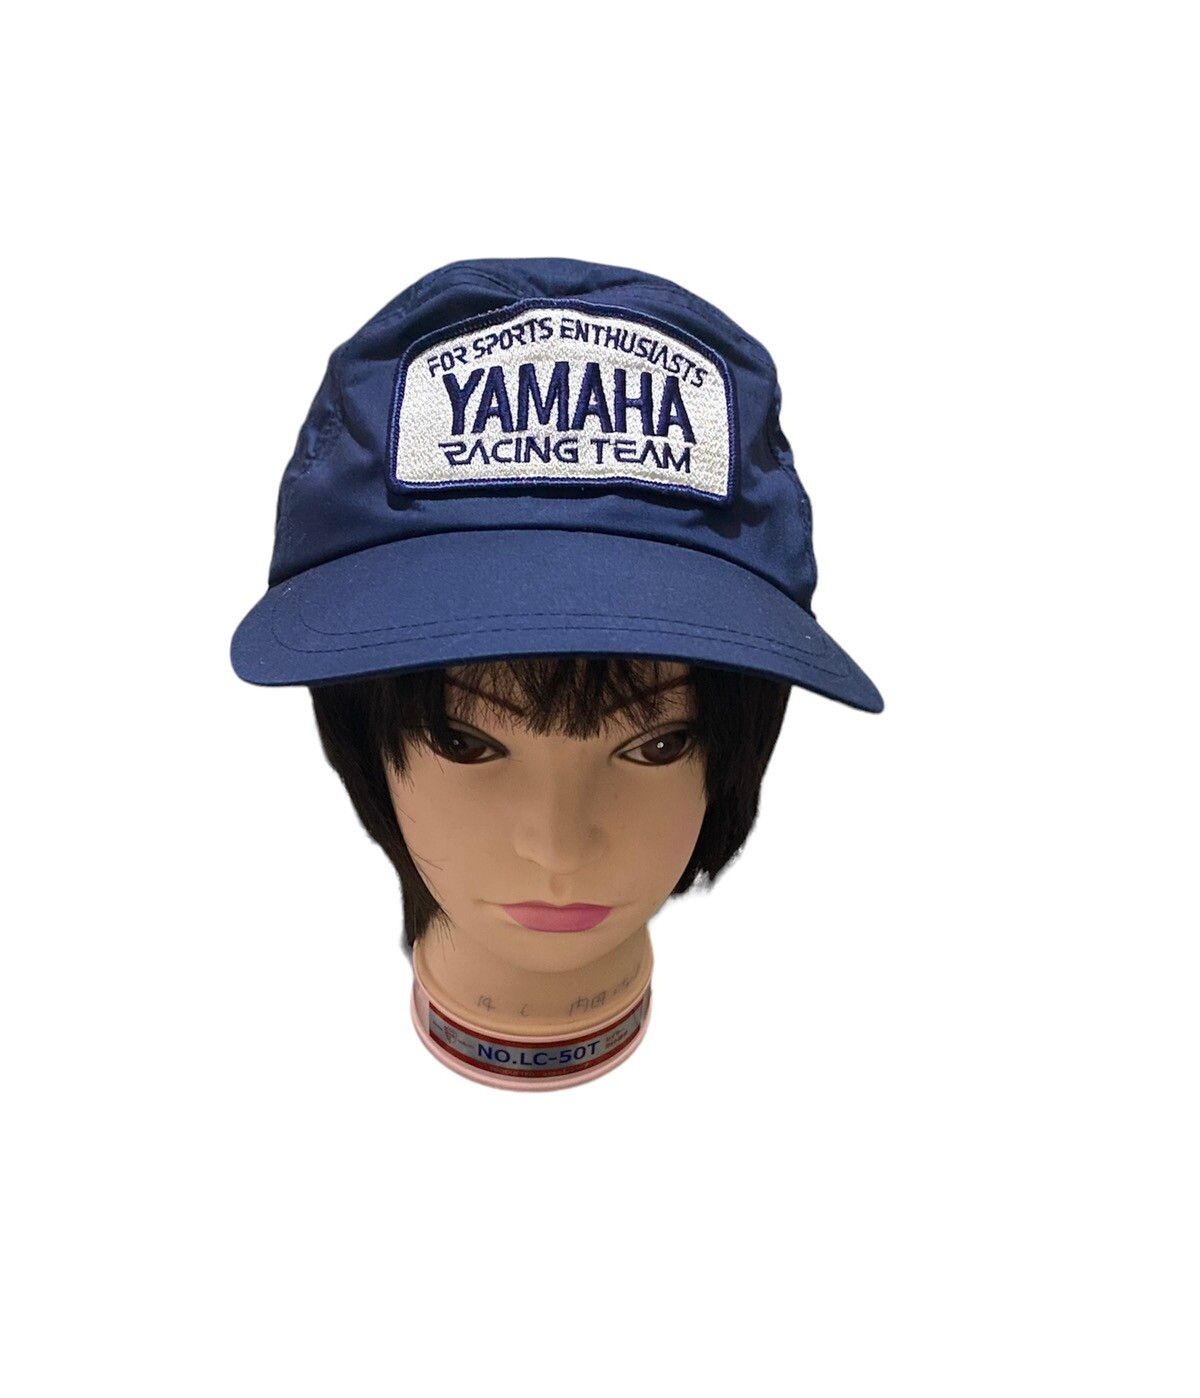 Vintage VTG 90’s Yamaha Racing Team Big Patches Cap Ear Flaps Size ONE SIZE - 1 Preview